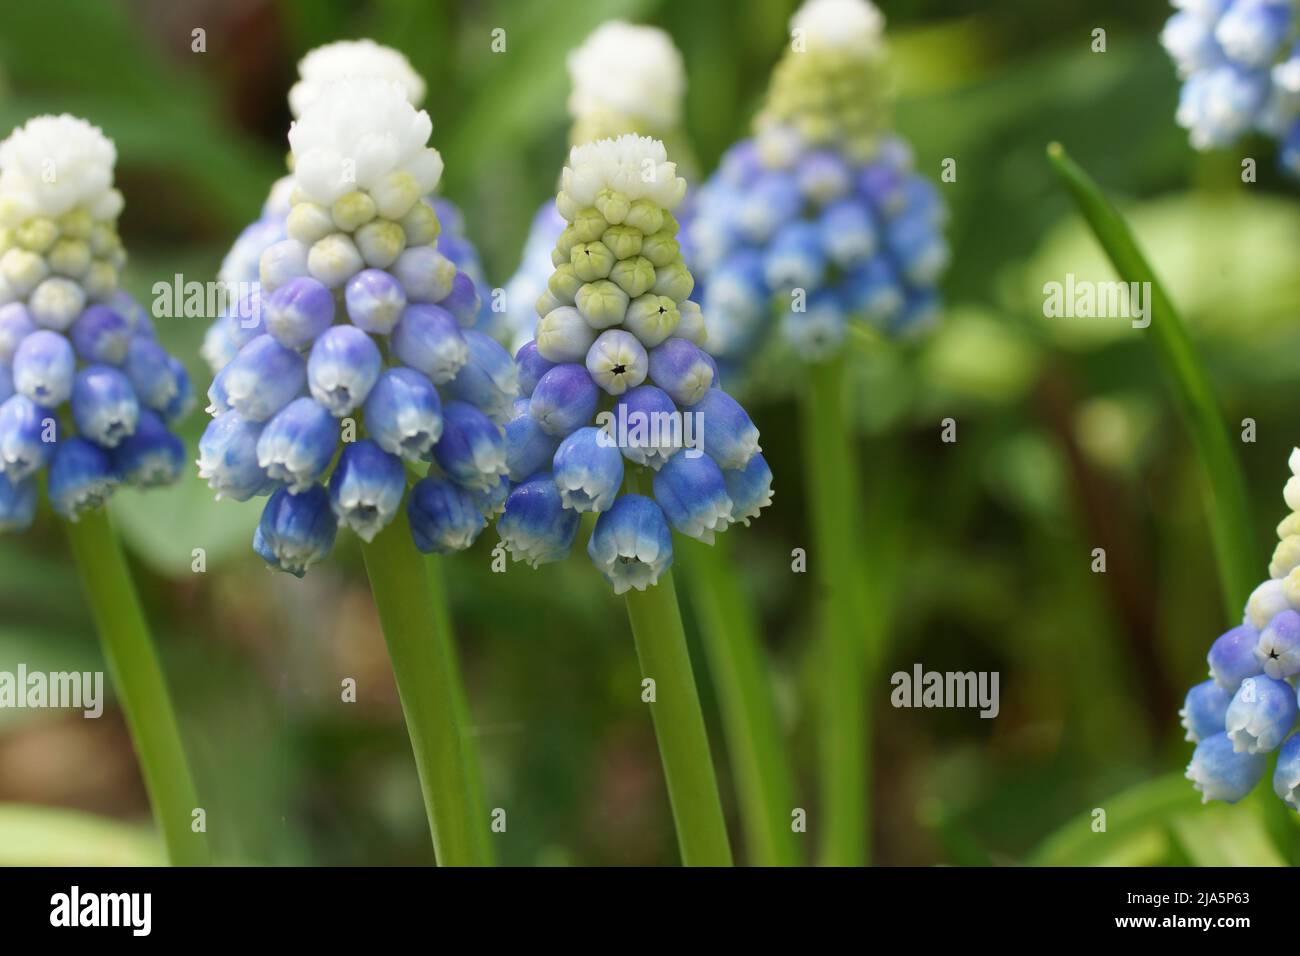 Mountain Lady Muscari. Spring flowers in the garden. Stock Photo